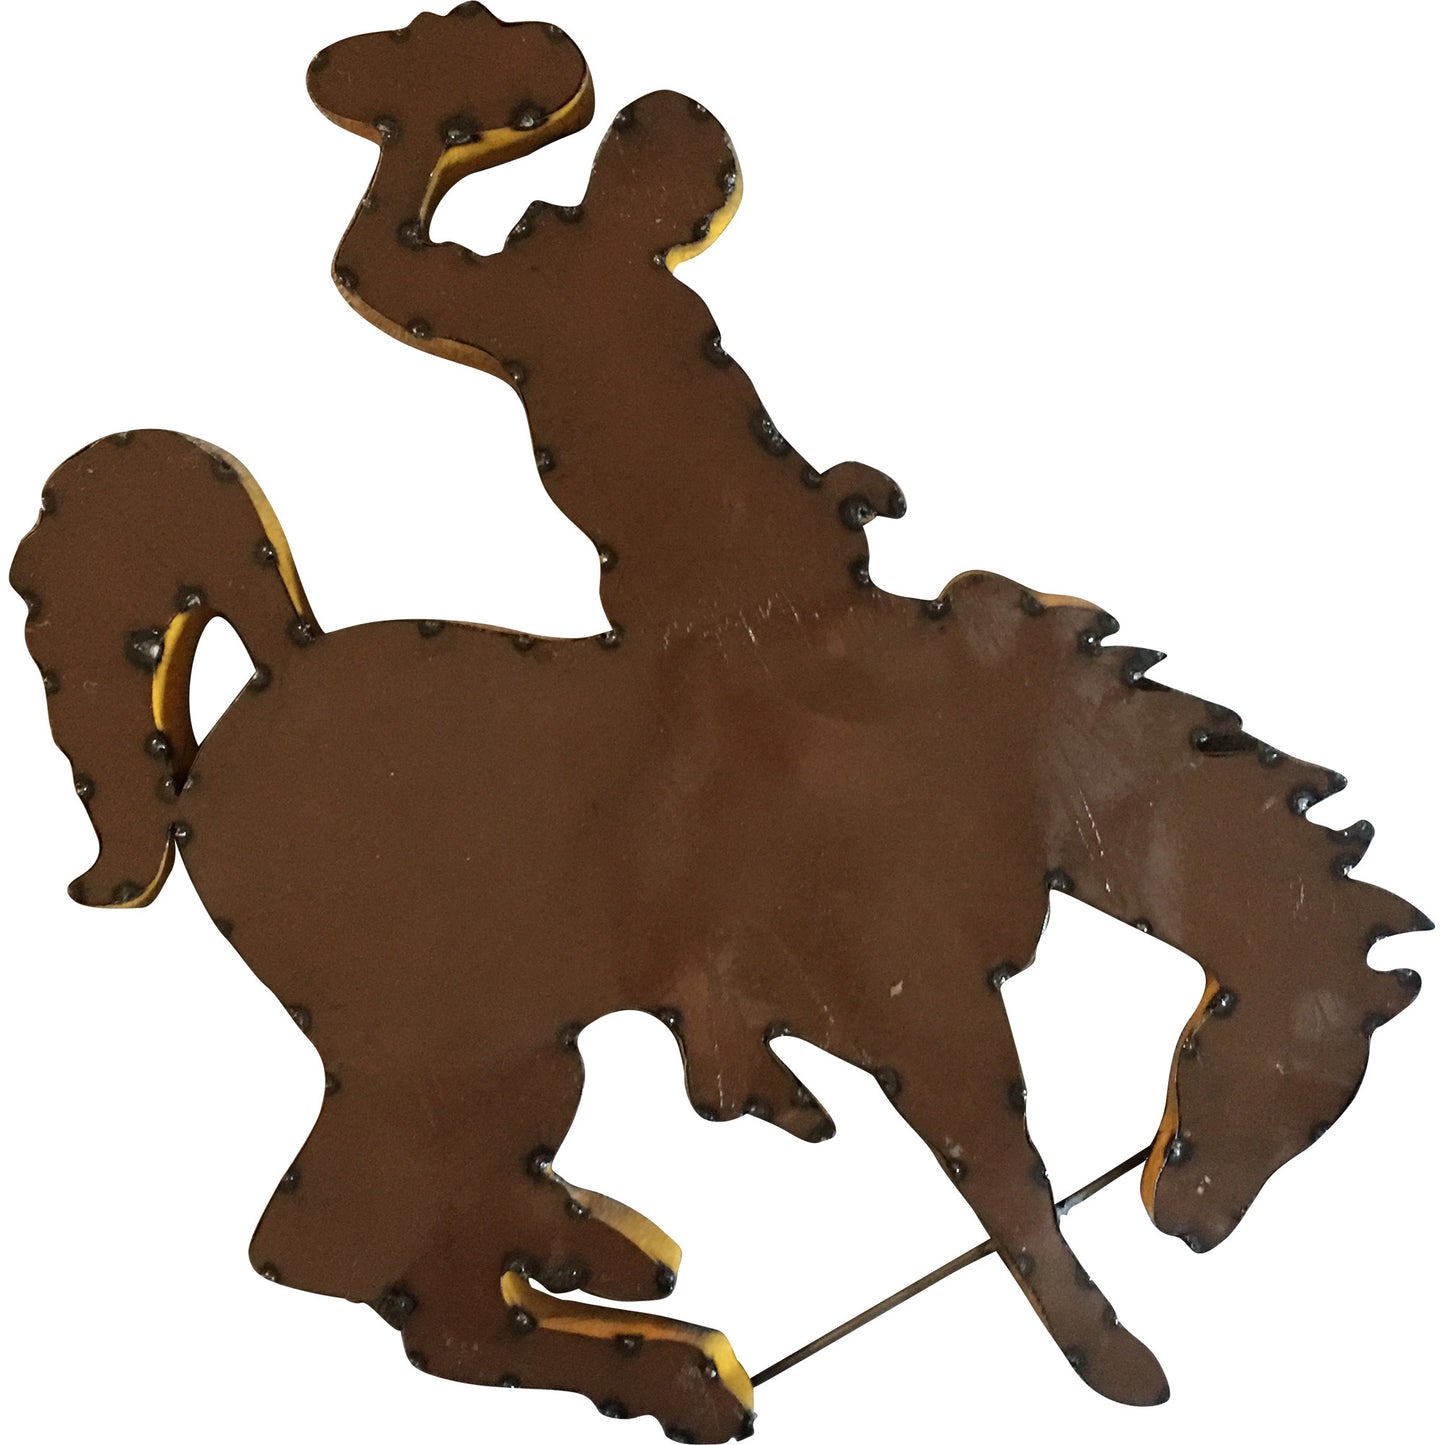 University of Wyoming Mascot Recycled Metal Wall Decor